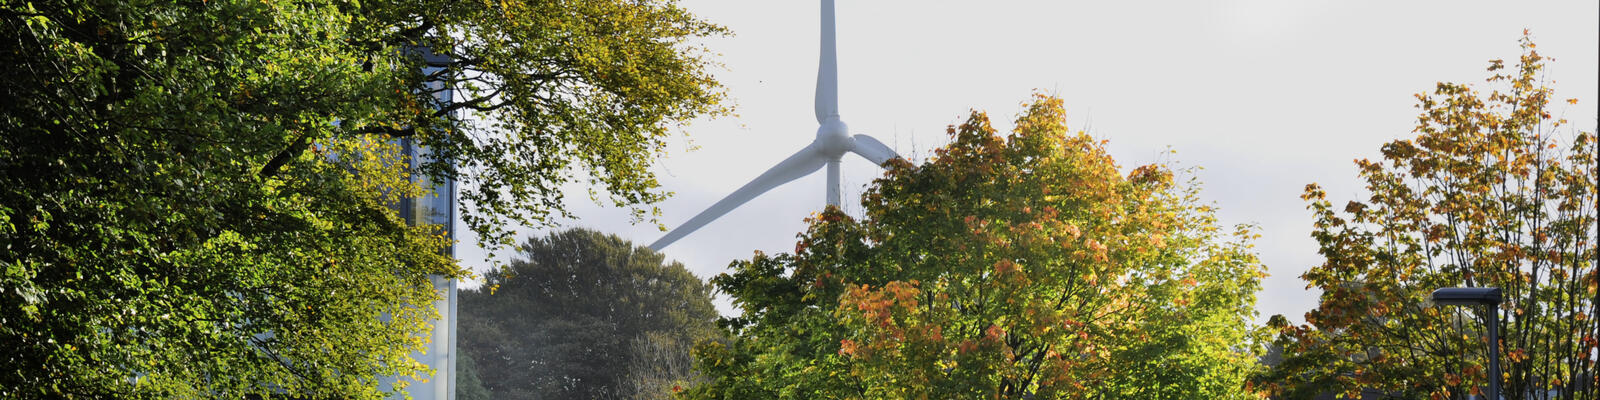 Wind turbine in the background and autumn trees in the foreground